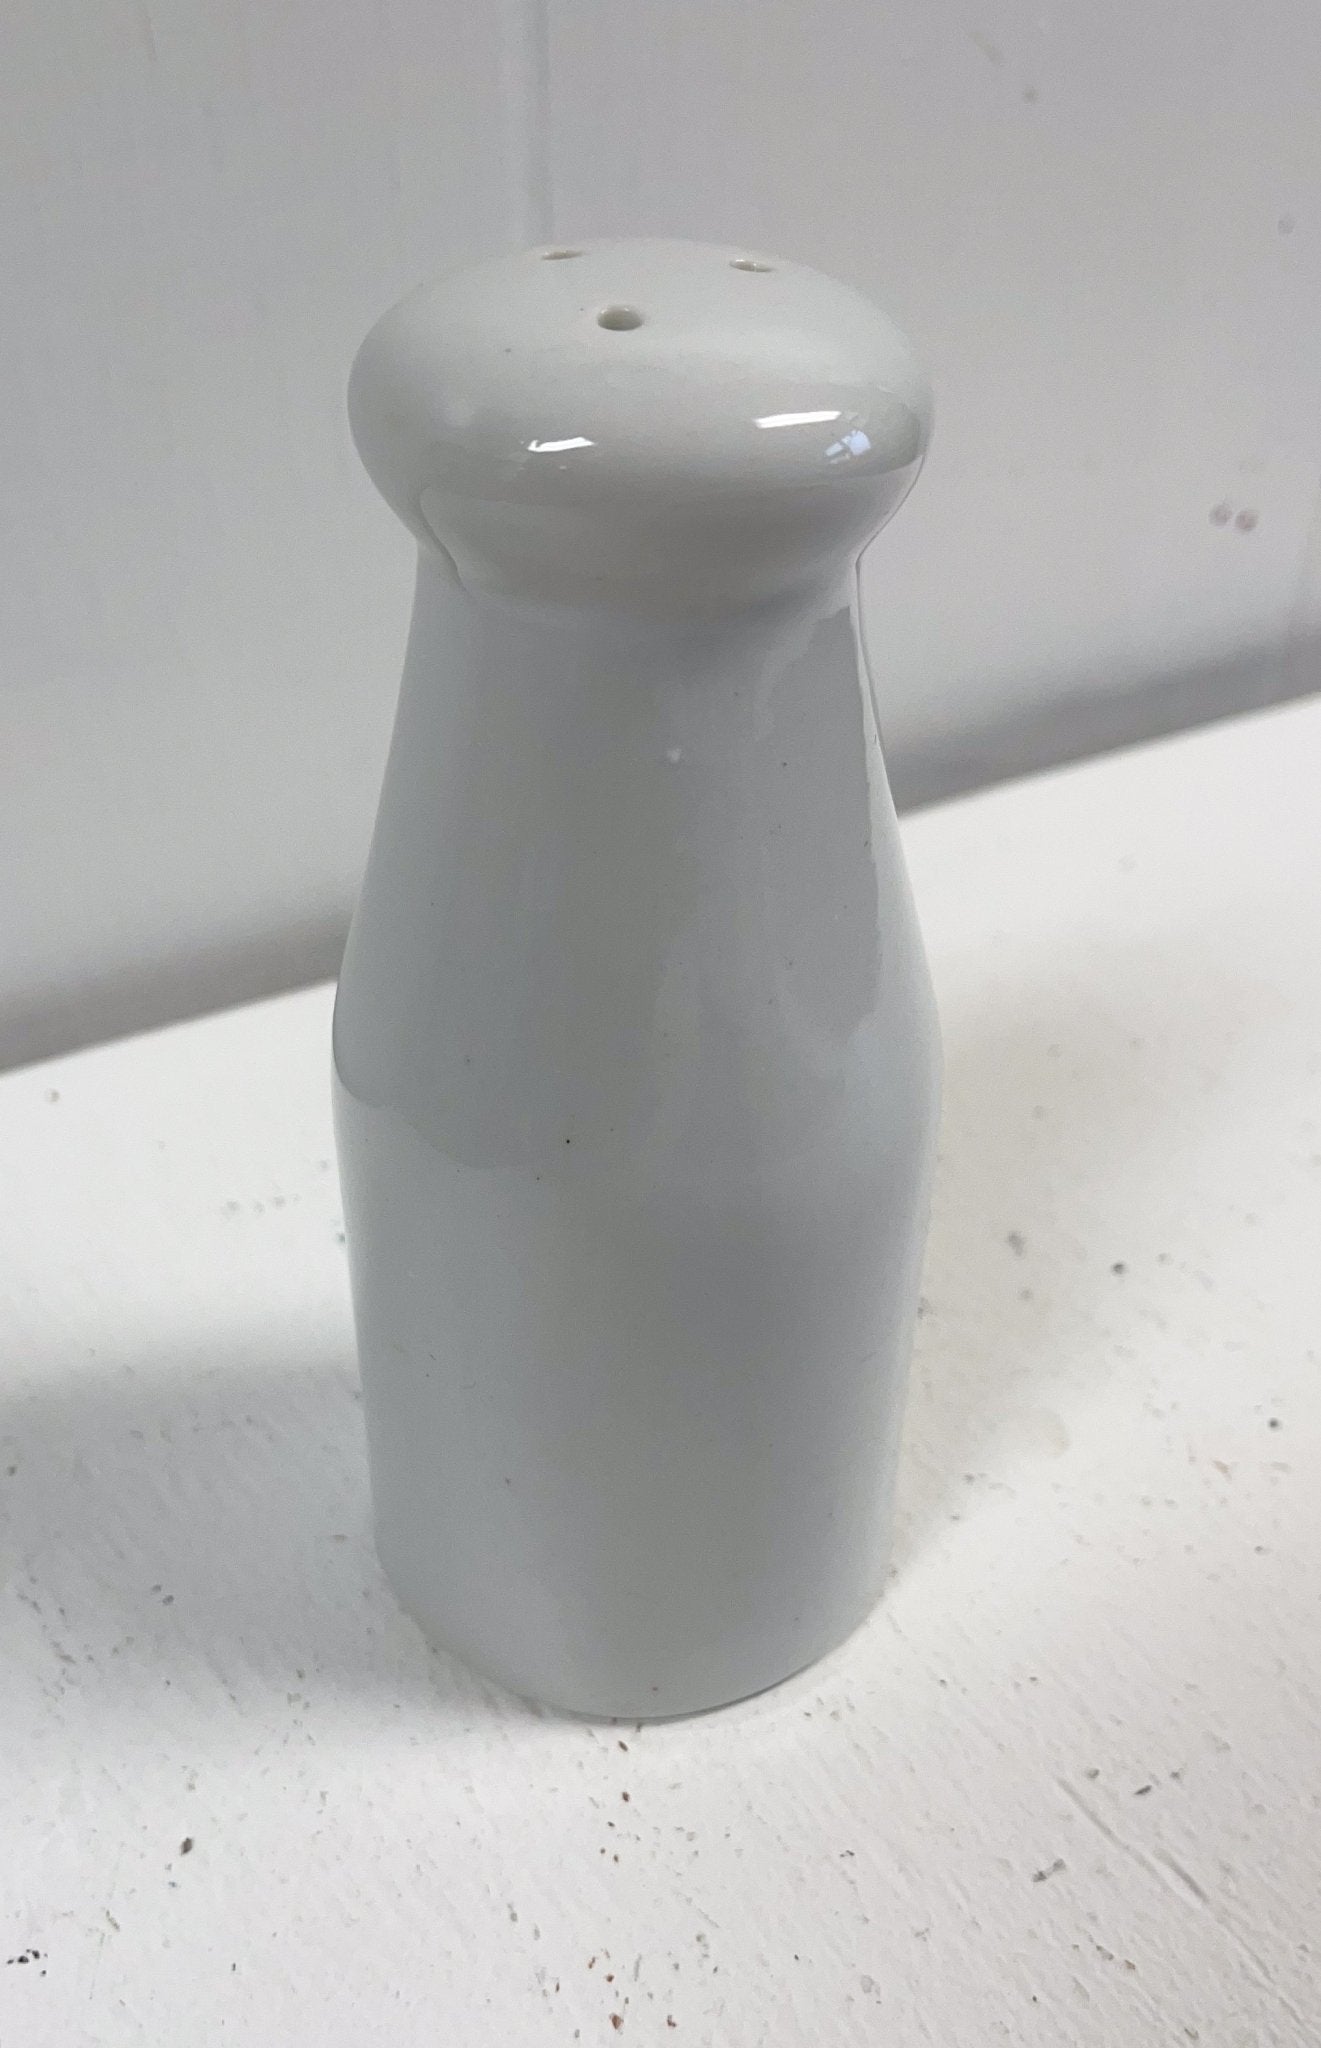 County Fresh Cow Pottery Refrigerator Deodorizer Bottle by Chadwick and Miller Inc-Chadwick and Miller Inc-Refrigerator Deodorizer Bottle-Stockton Farm